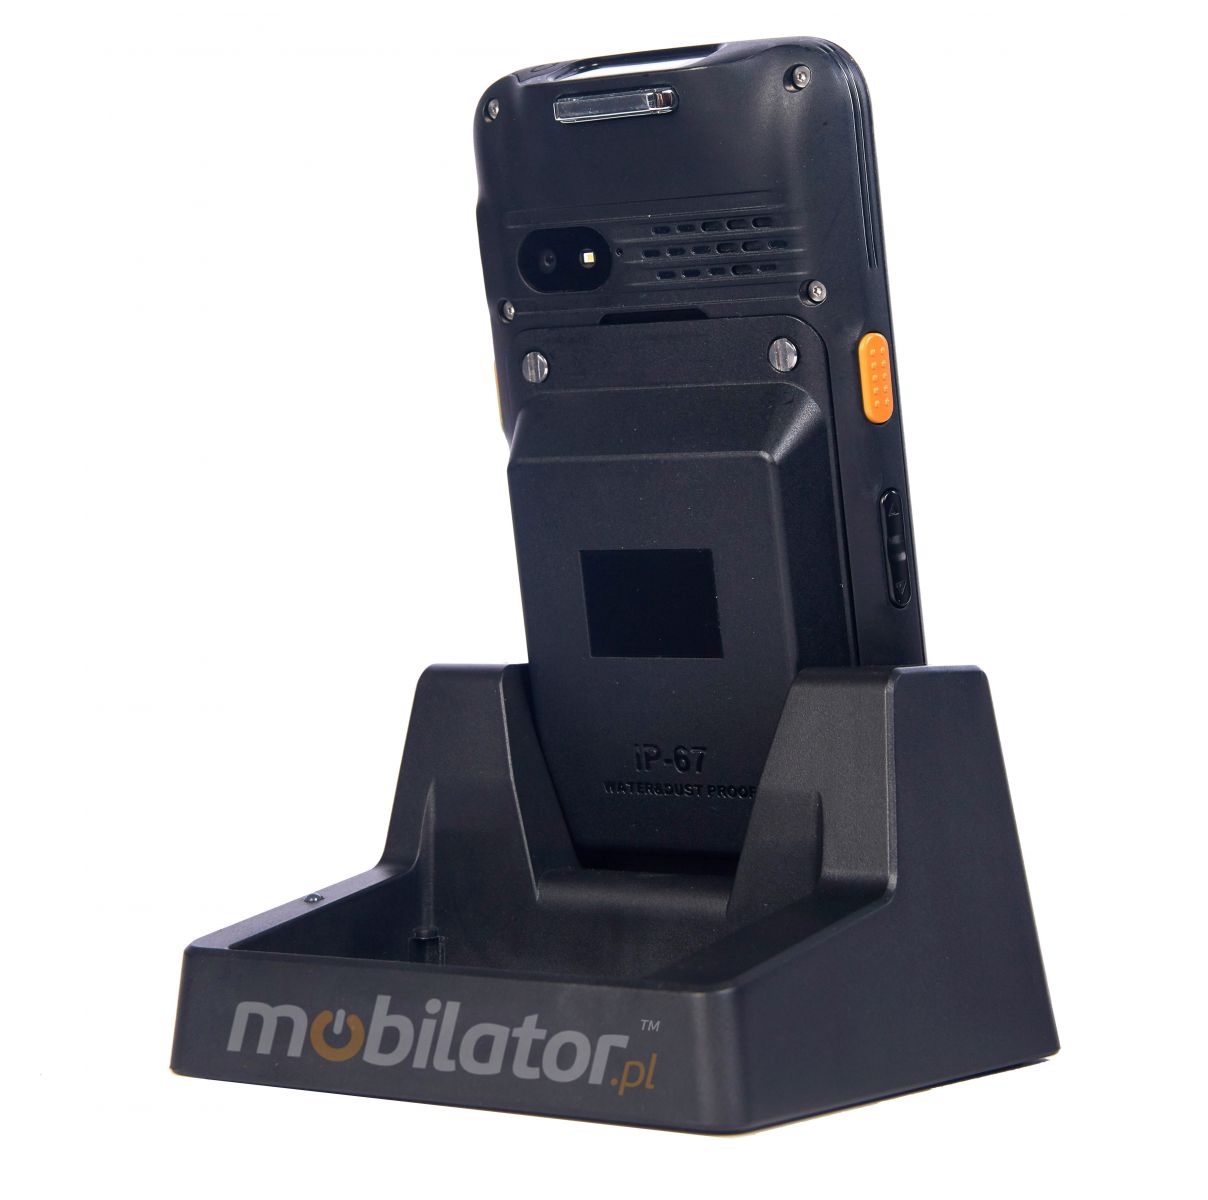 MobiPad V77 v.3 - Modern, rugged (IP67) data terminal with MIL-STD-810G, NFC certificate and a 2D scanner